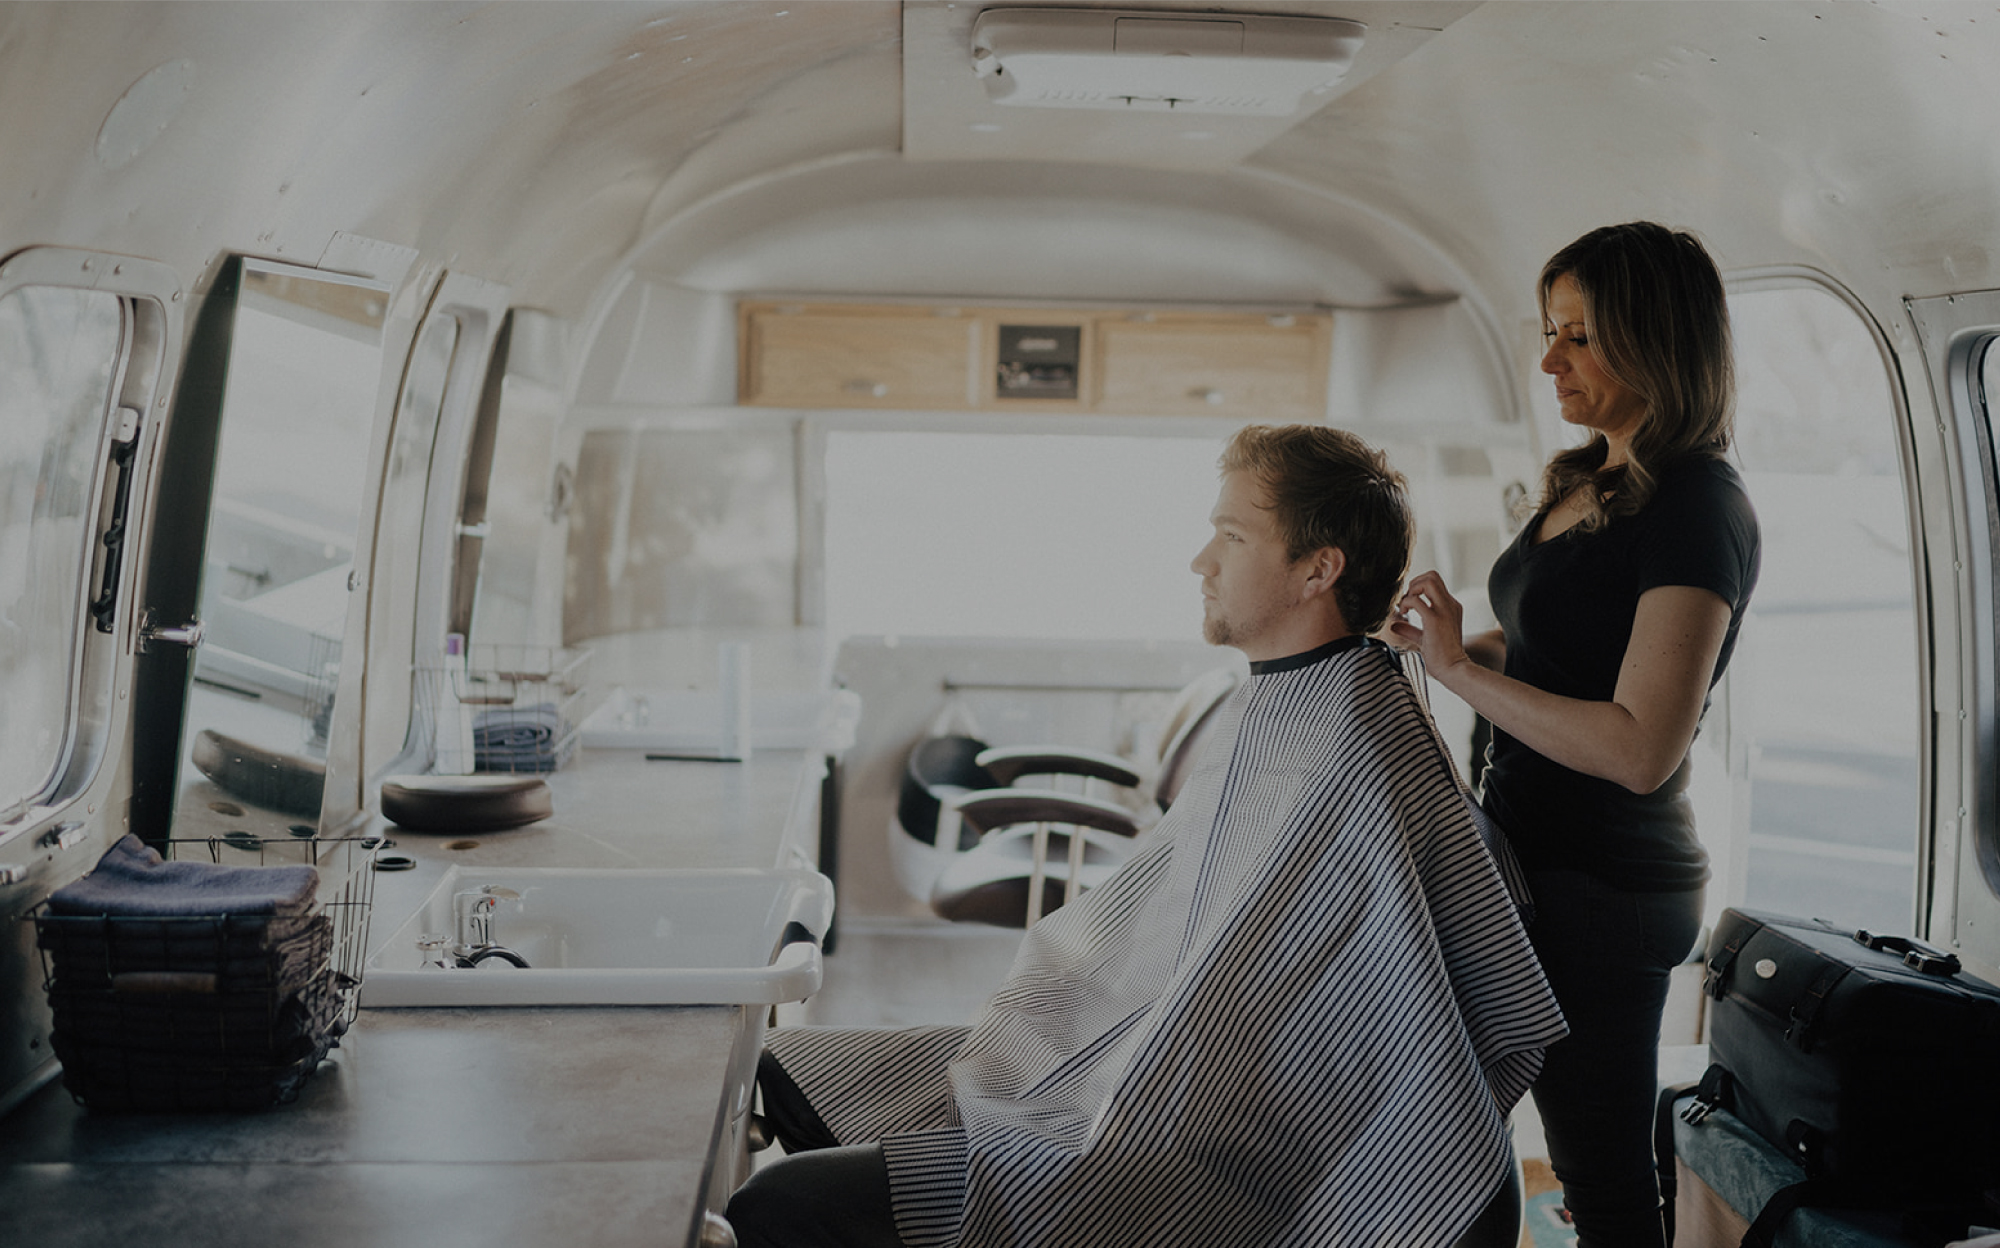 Find a mobile hair stylist or barber near you